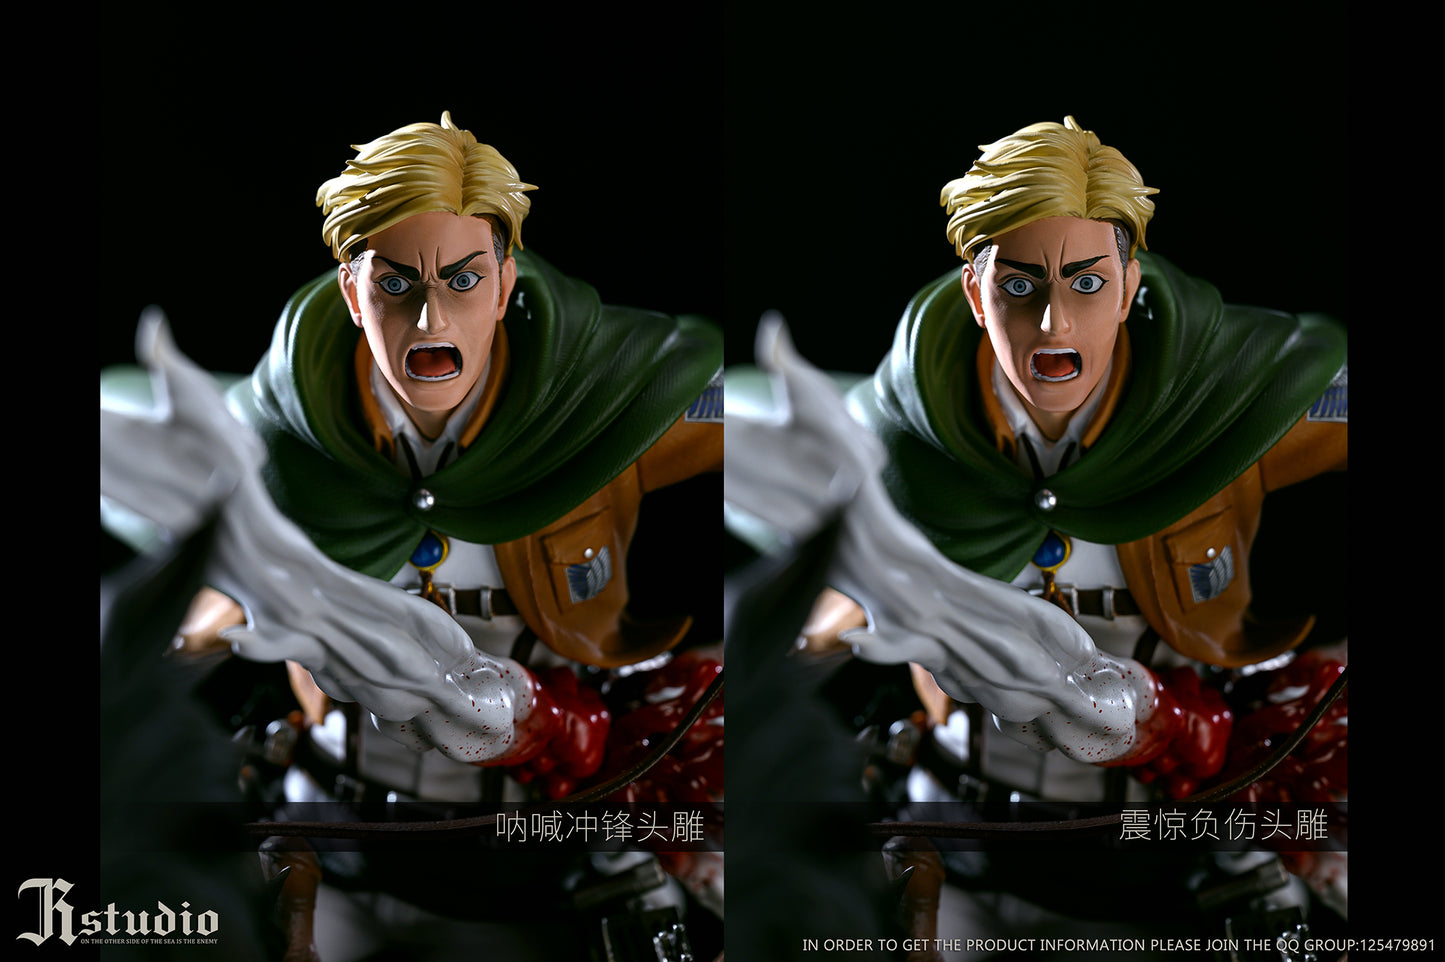 JR STUDIO – ATTACK ON TITAN: ERWIN SMITH [SOLD OUT]